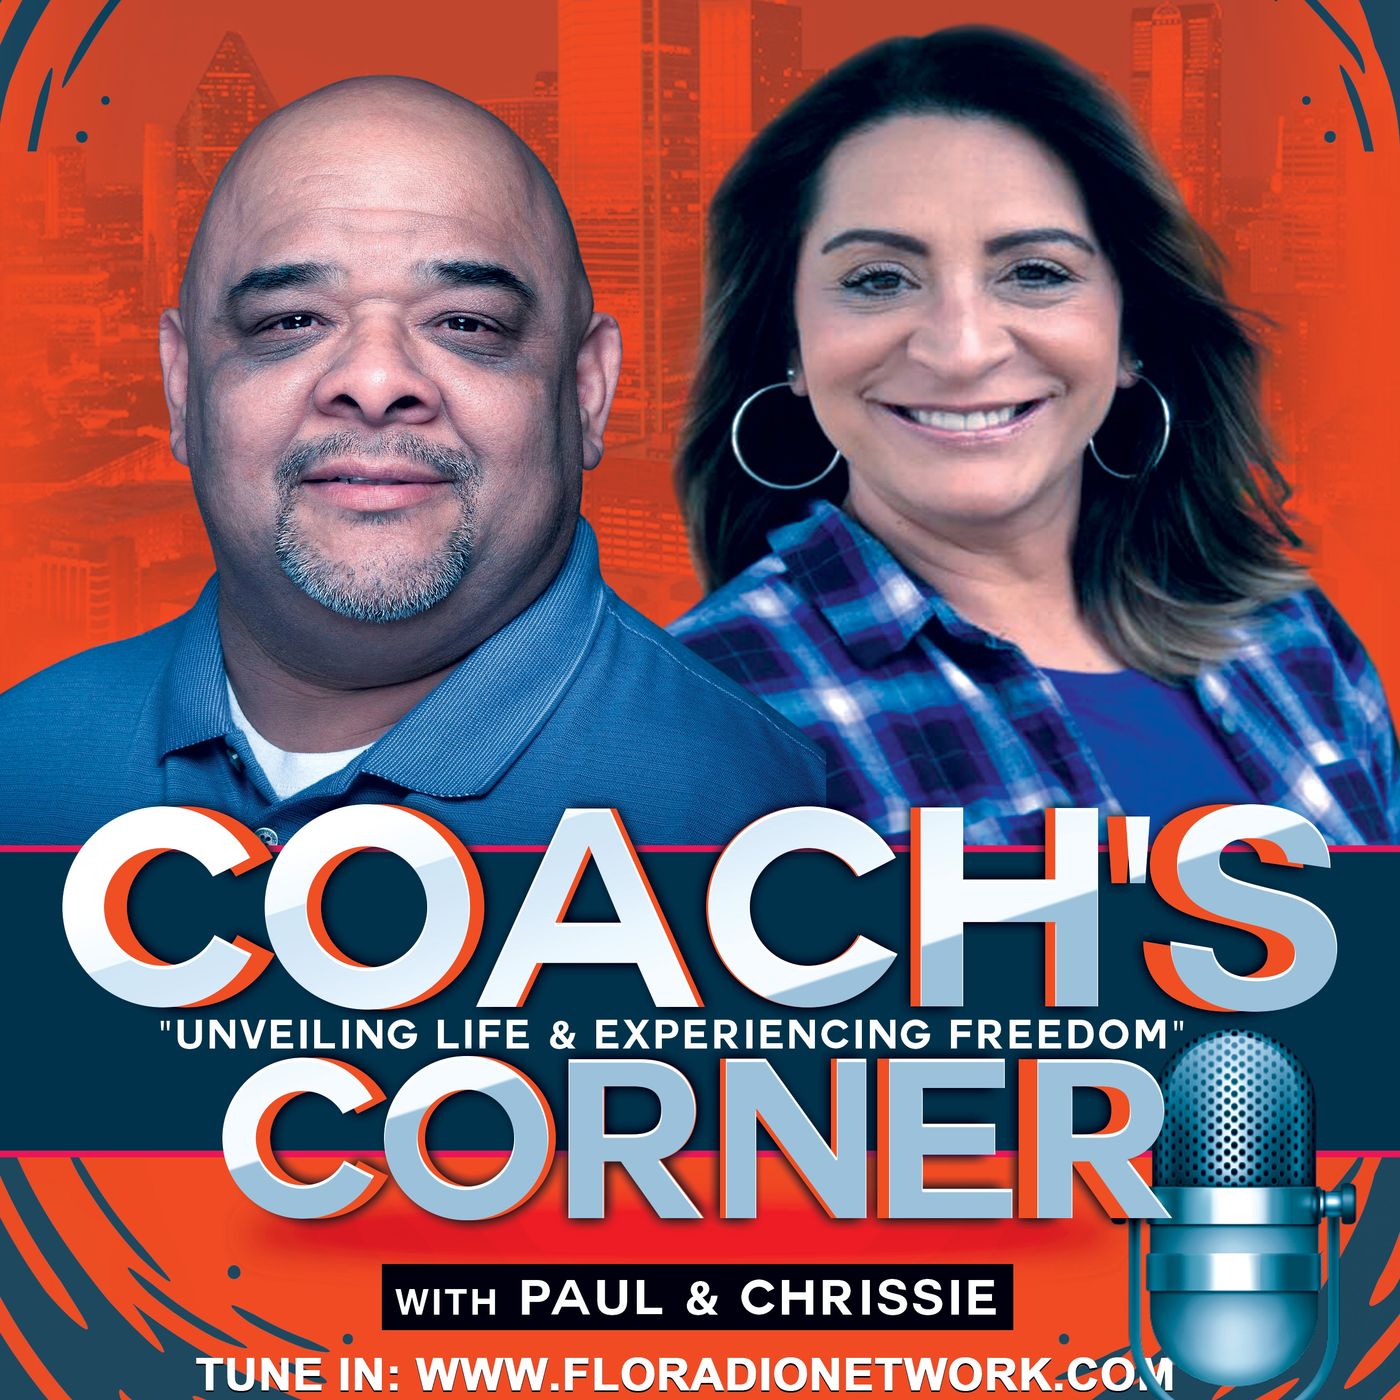 Coach's Corner with Paul & Chrissie